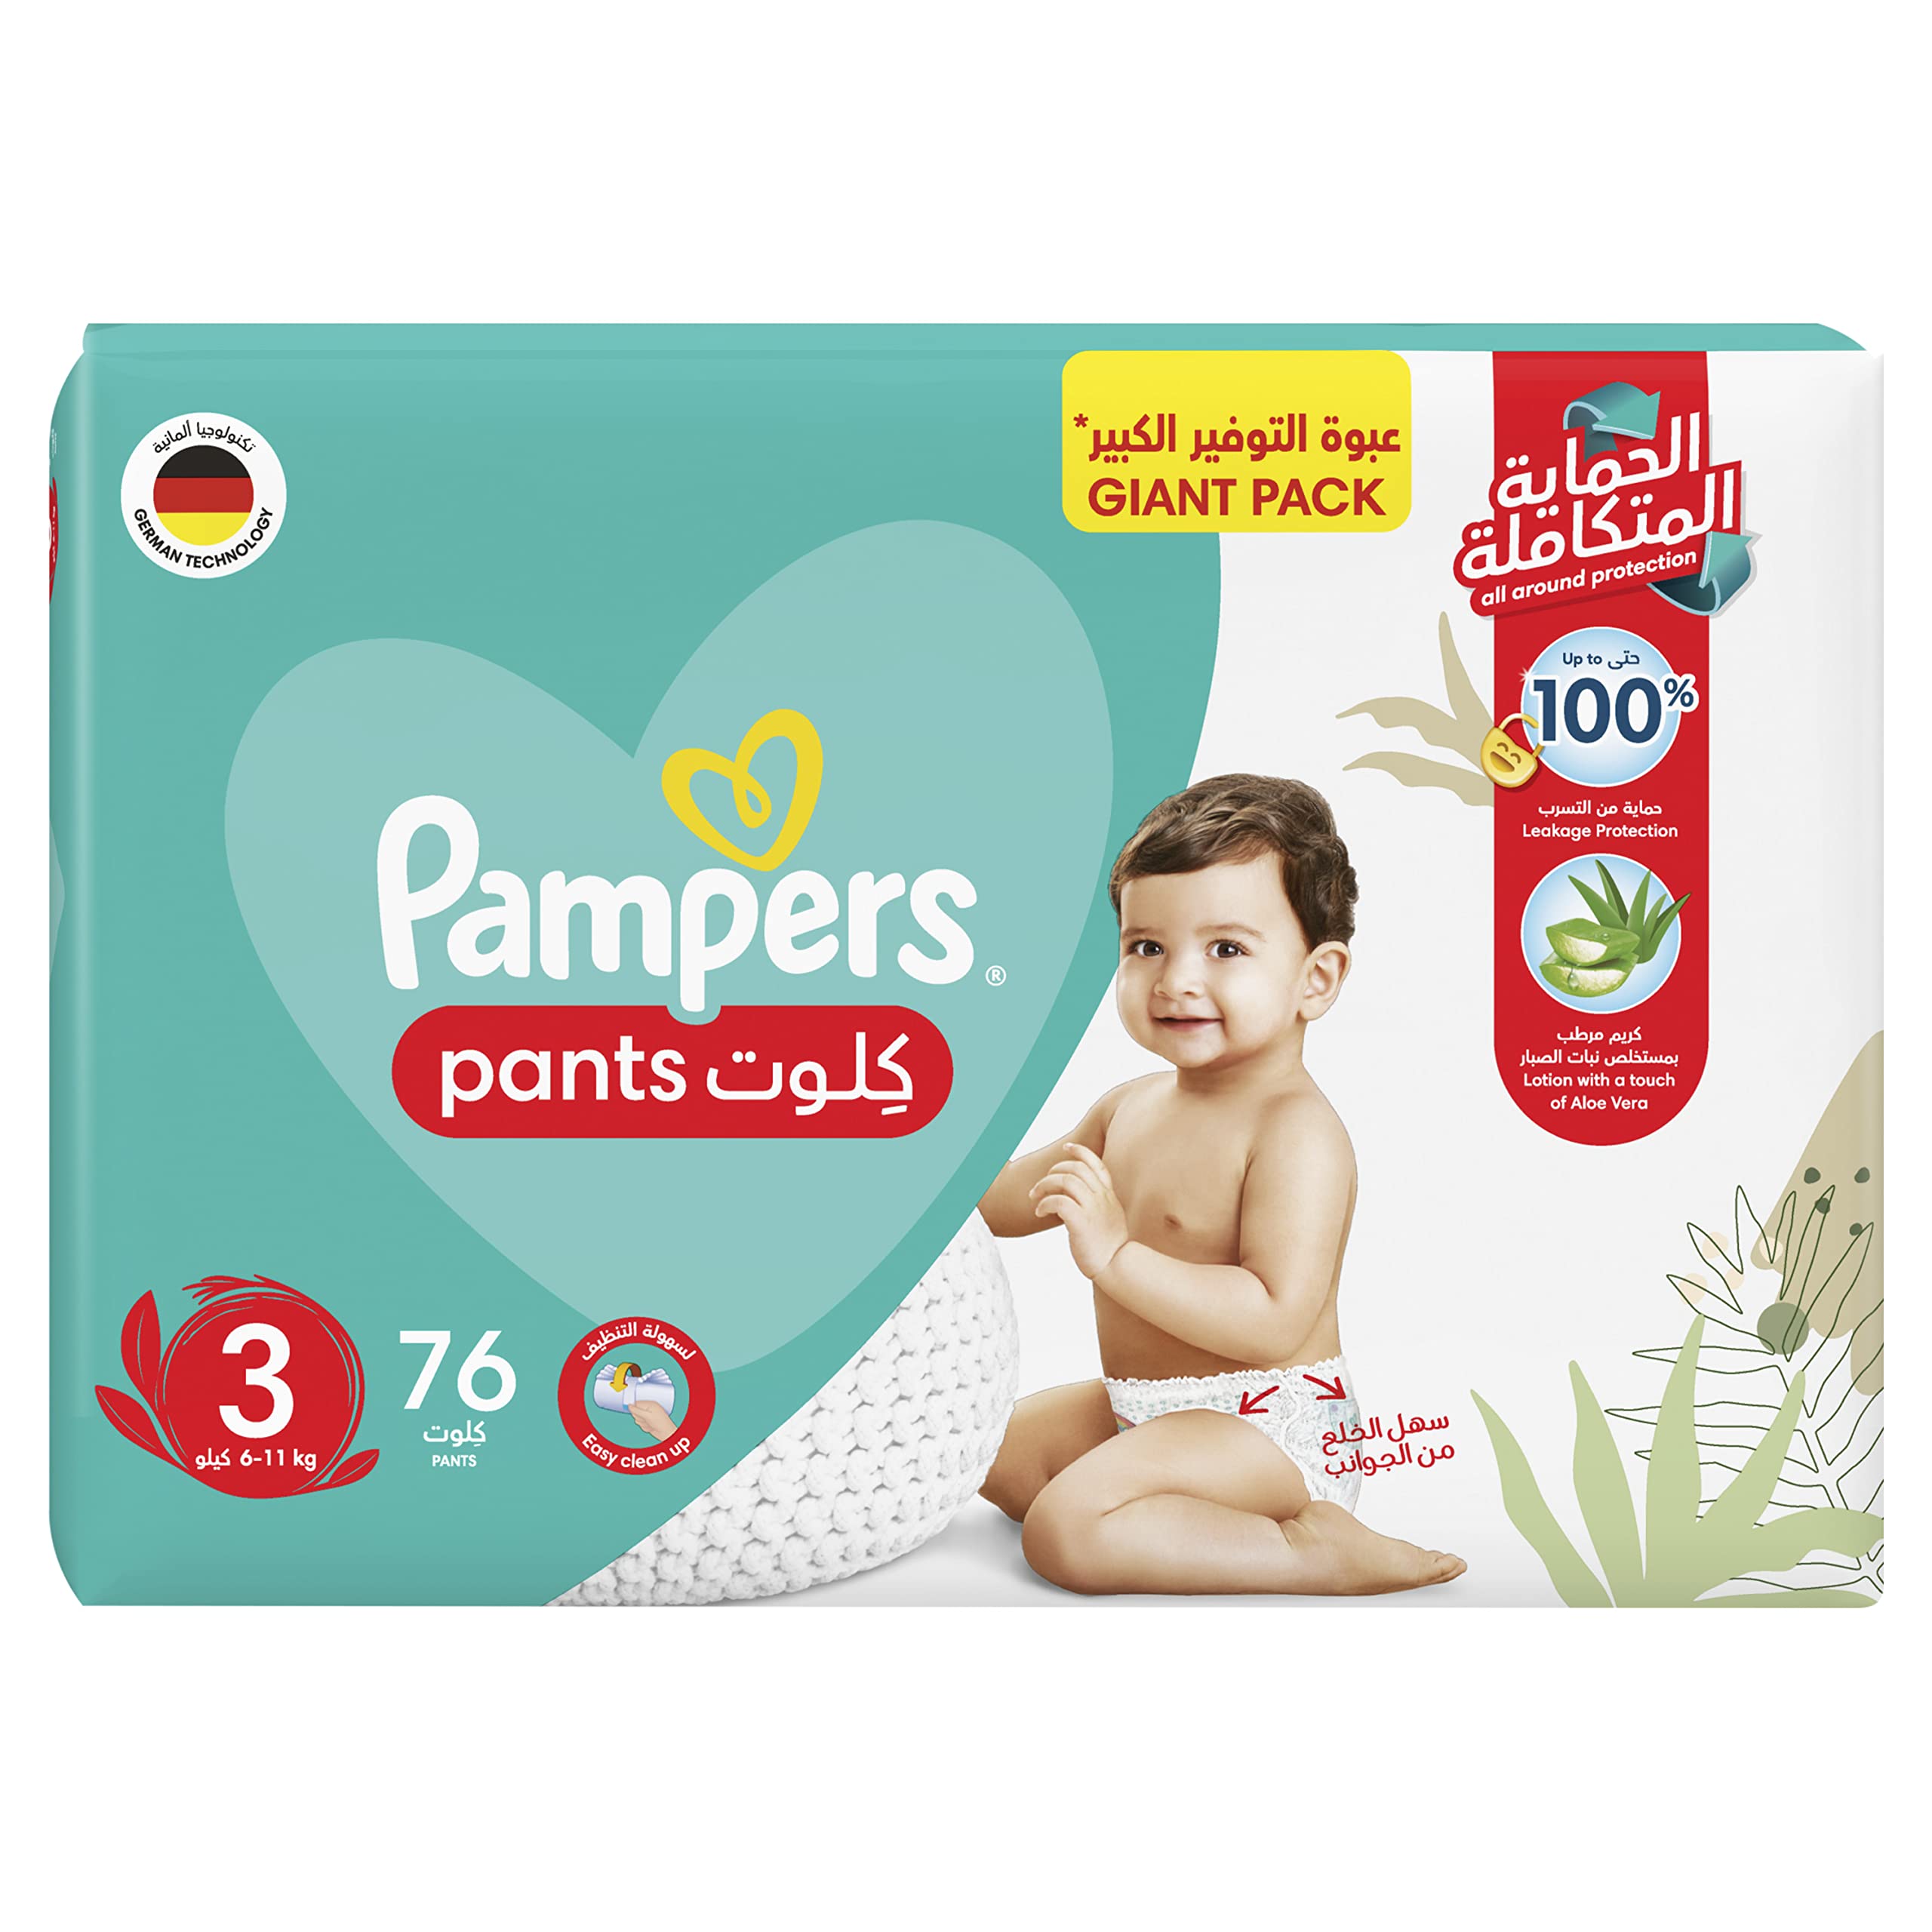 Pampers Baby-Dry Pants with Aloe Vera Lotion, Stretchy Sides, and Leakage Protection, Size 3, 6-11 kg, Mega Pack, 76 Pants  حفاضات بامبرز بانتي، مقاس 3، ميدي، 6-11 كغم، عبوة كبيرة، 76 حفاض